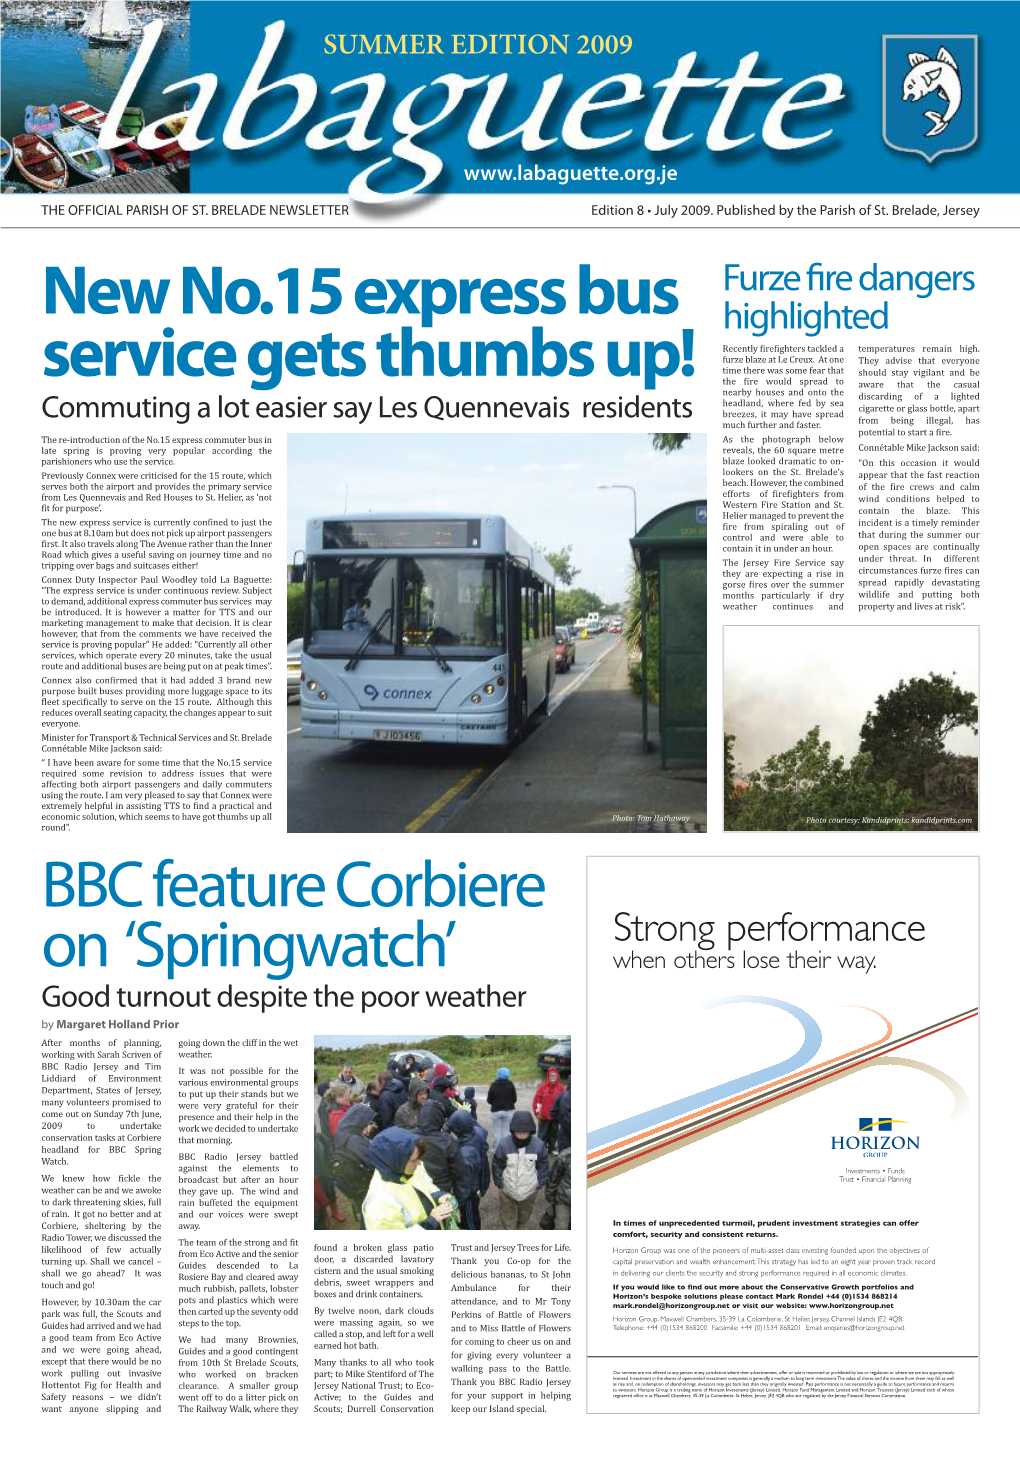 New No.15 Express Bus Service Gets Thumbs